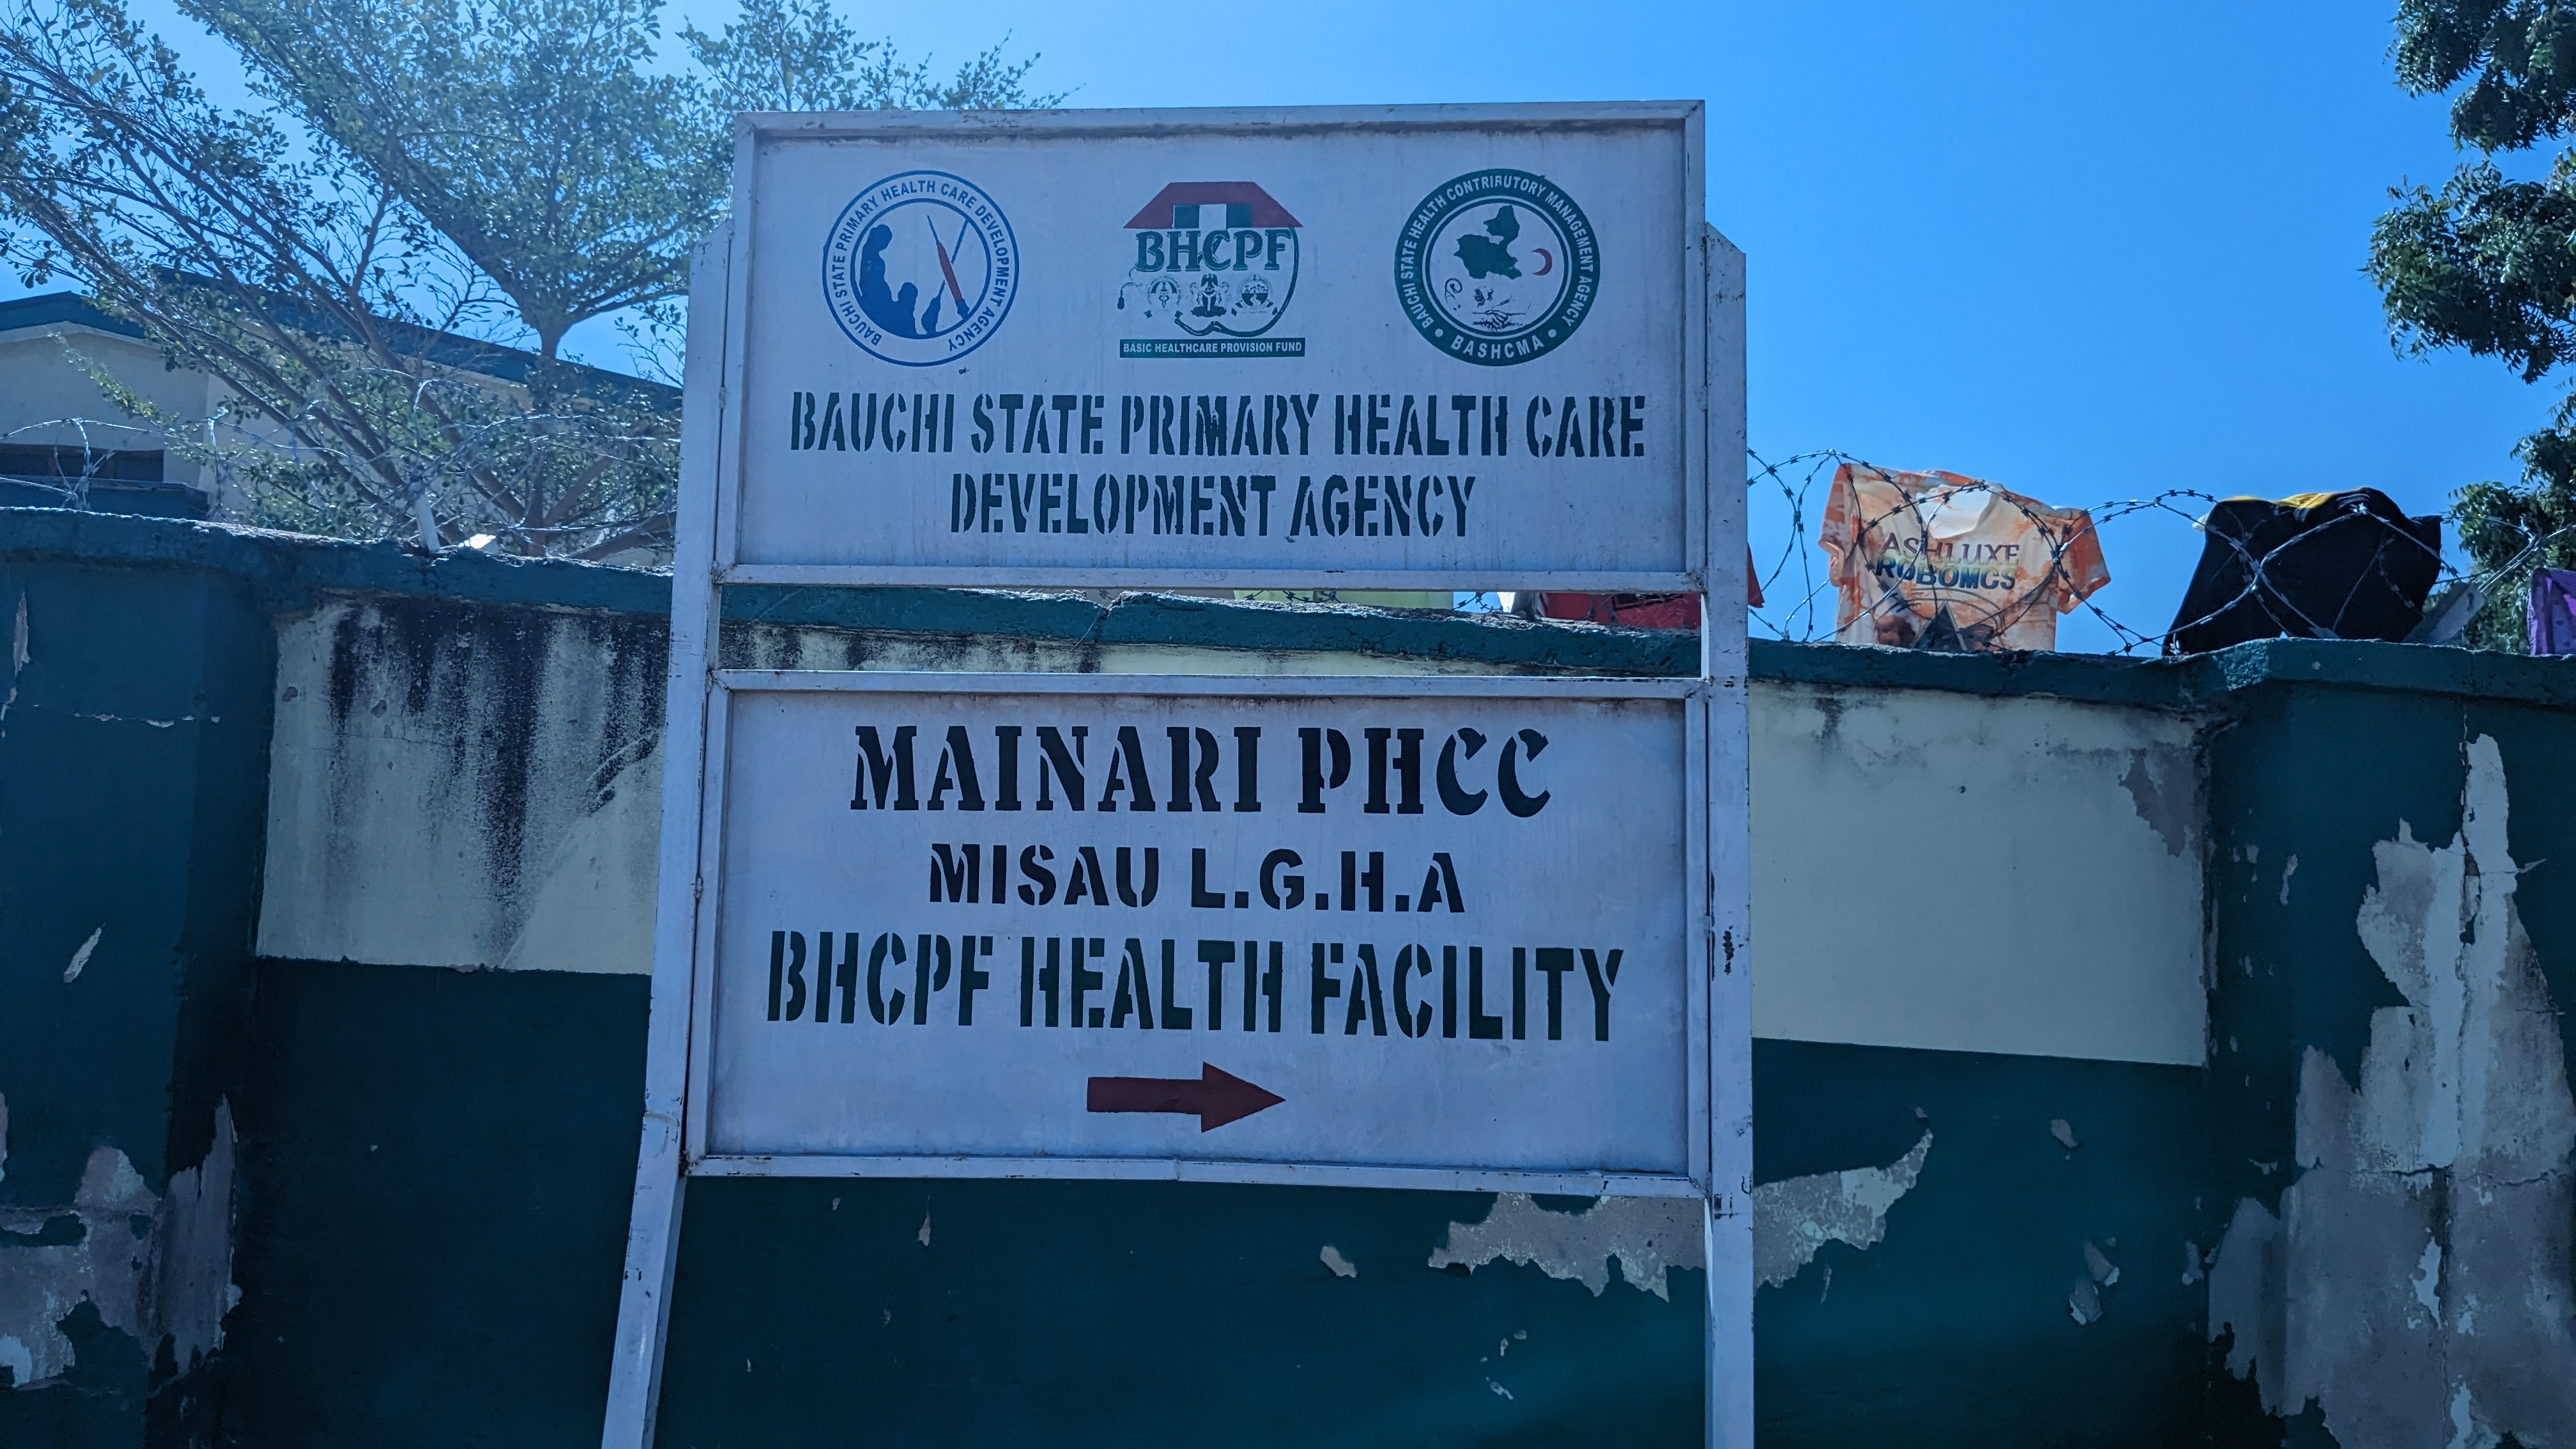 REPORTER's DIARY: Inside Bauchi Health Centre Where Very Sick Official Must Treat Tens of Sick People